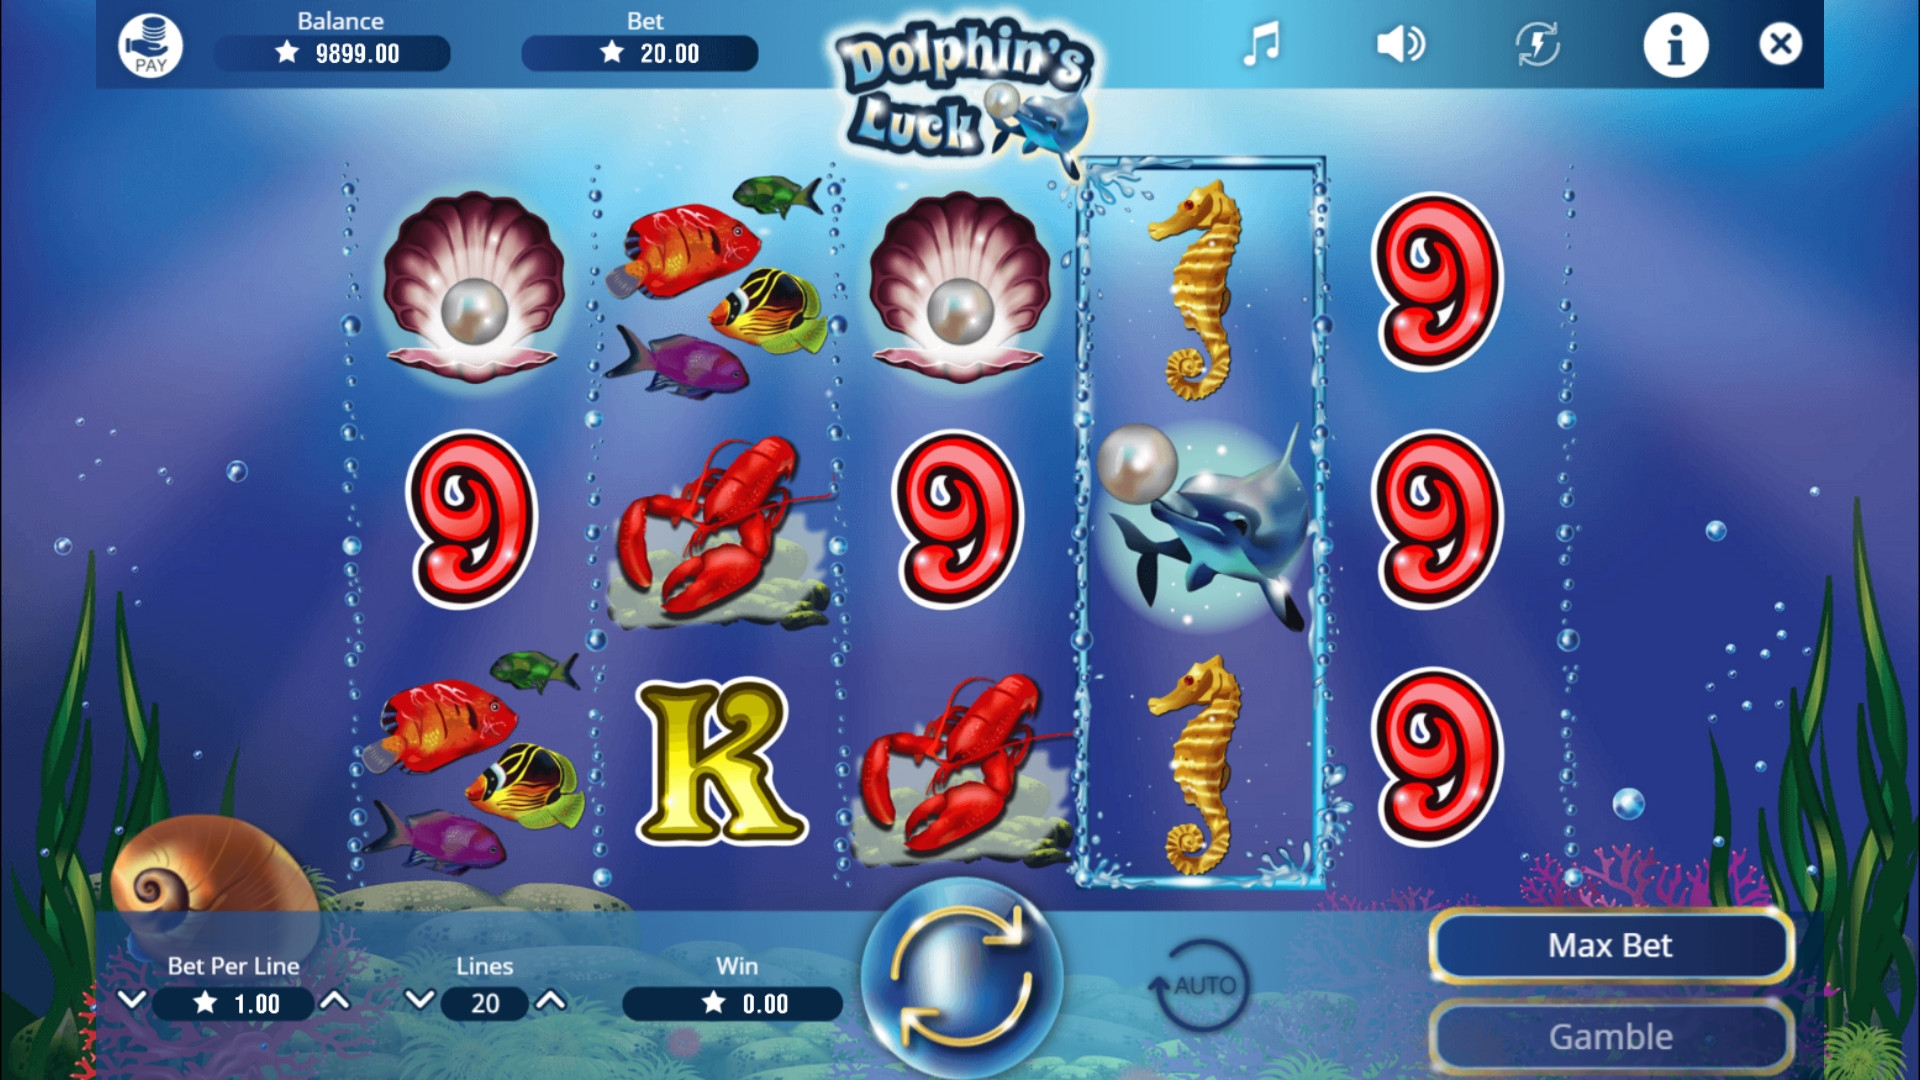 Dolphin’s Luck (Dolphin’s Luck) from category Slots